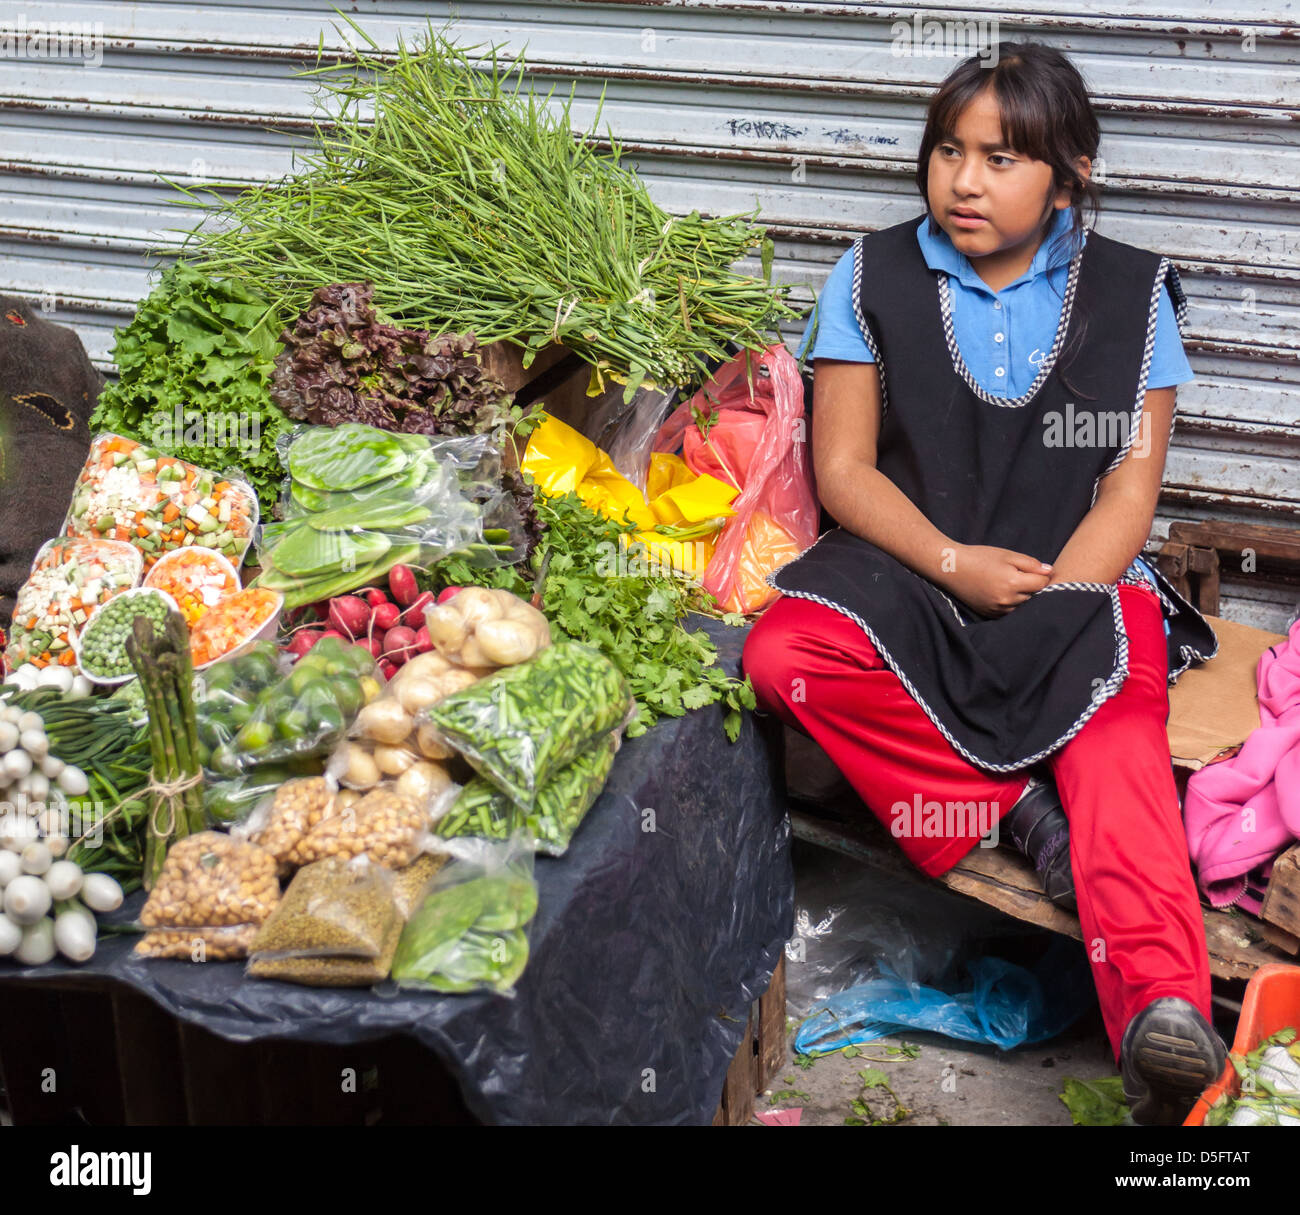 Young Mexican girl selling fruits and vegetables in a market in Queretaro, Mexico. Stock Photo